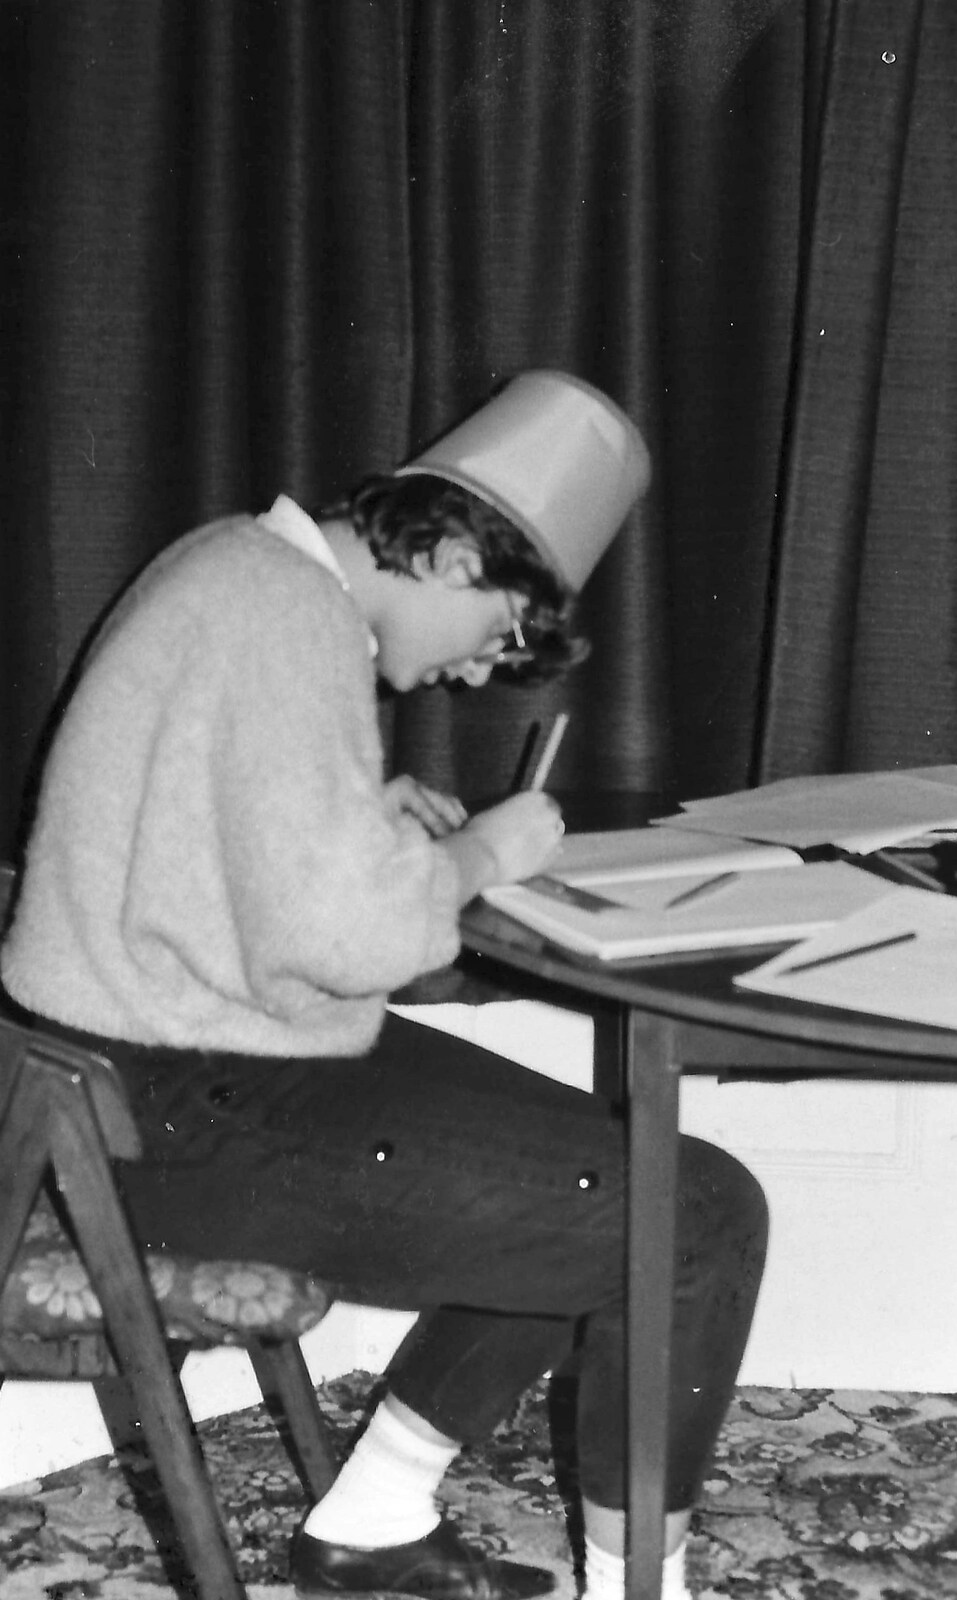 Barbara does some actual course work from Uni: The First Year in Black and White, Plymouth Polytechnic, Devon - 8th April 1986